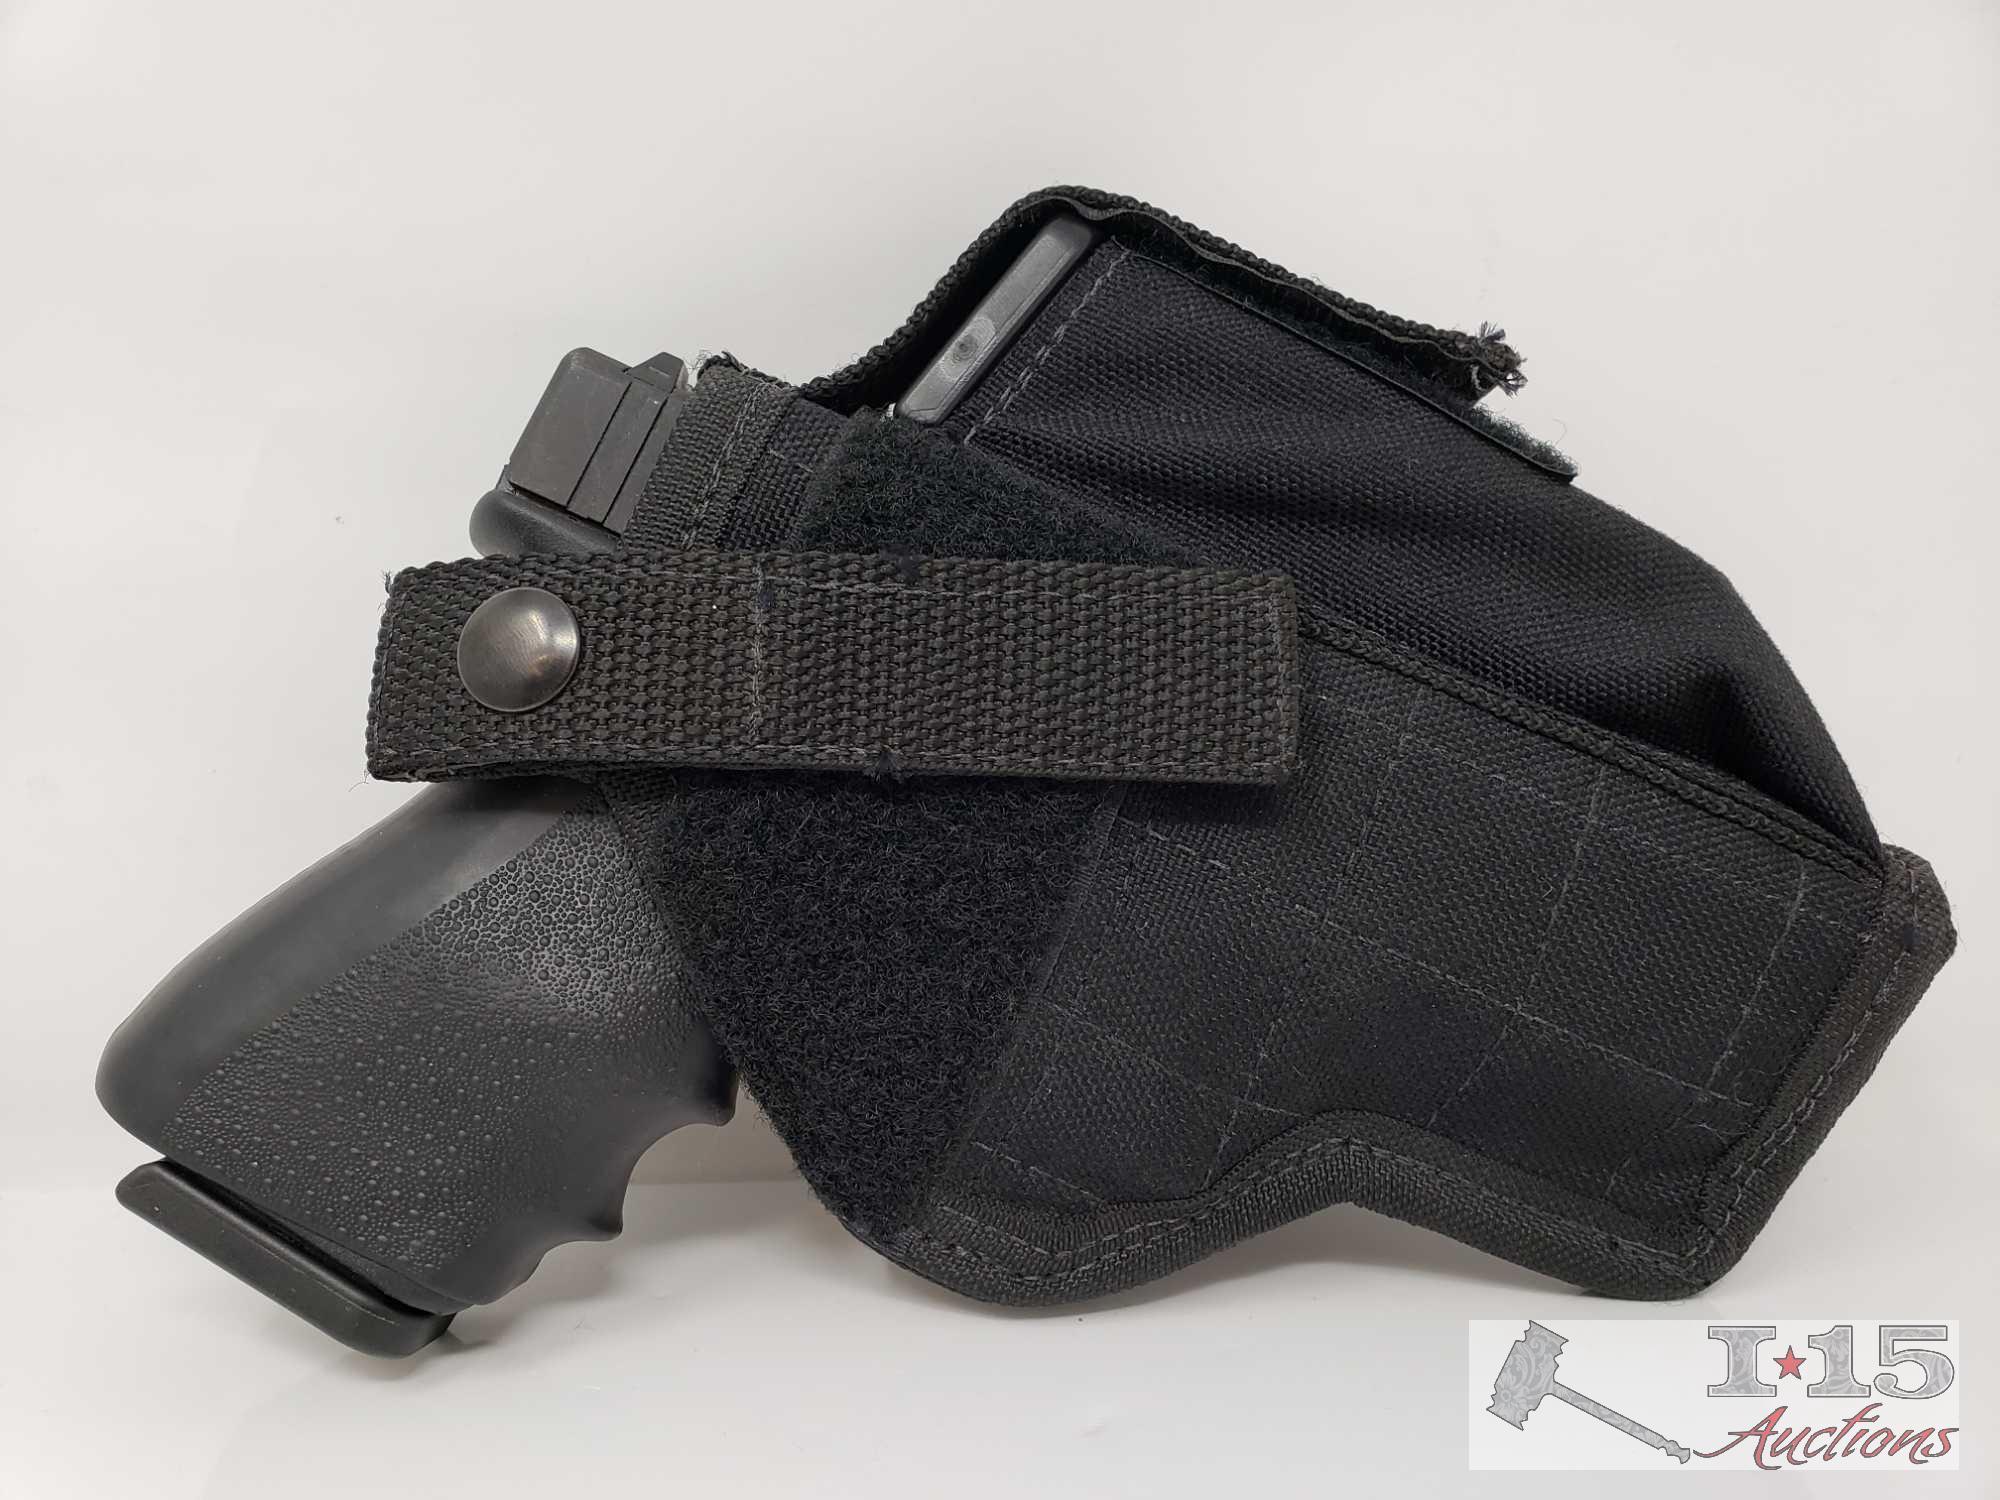 Glock 23 Semi-Auto .40 S&W Pistol with 2 Mags and Holster